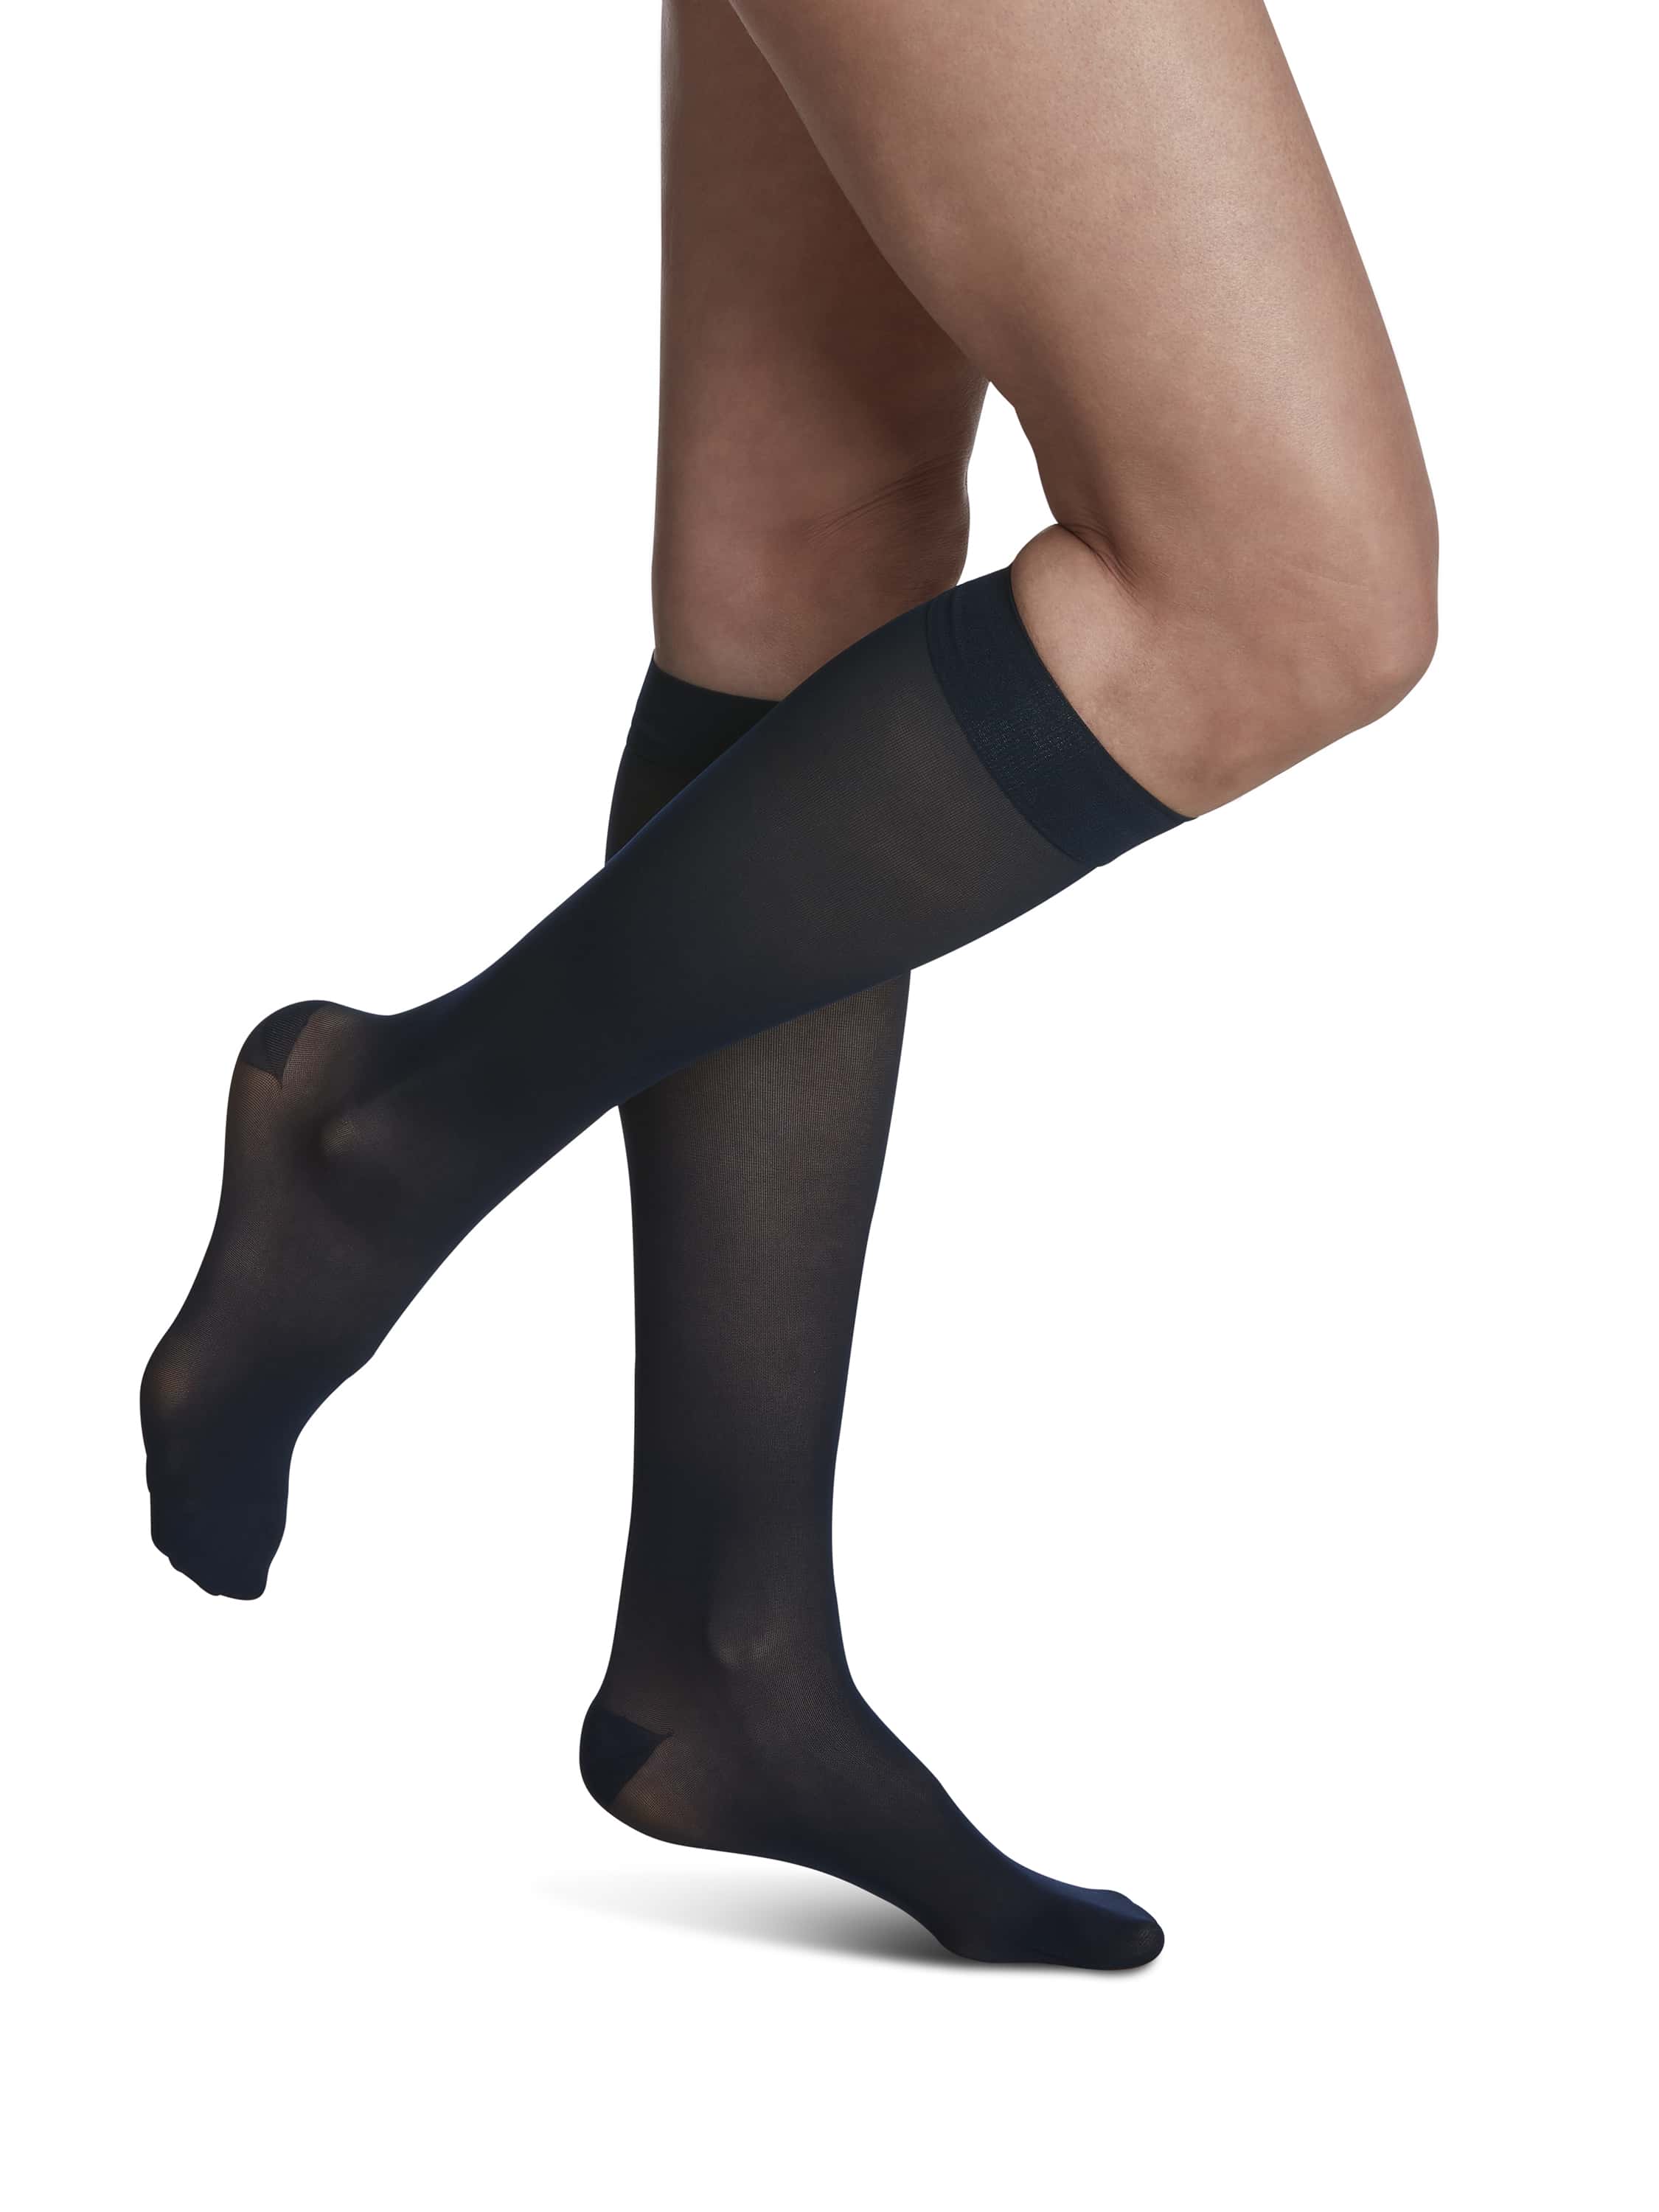 Sigvaris knee-high compression stockings in navy